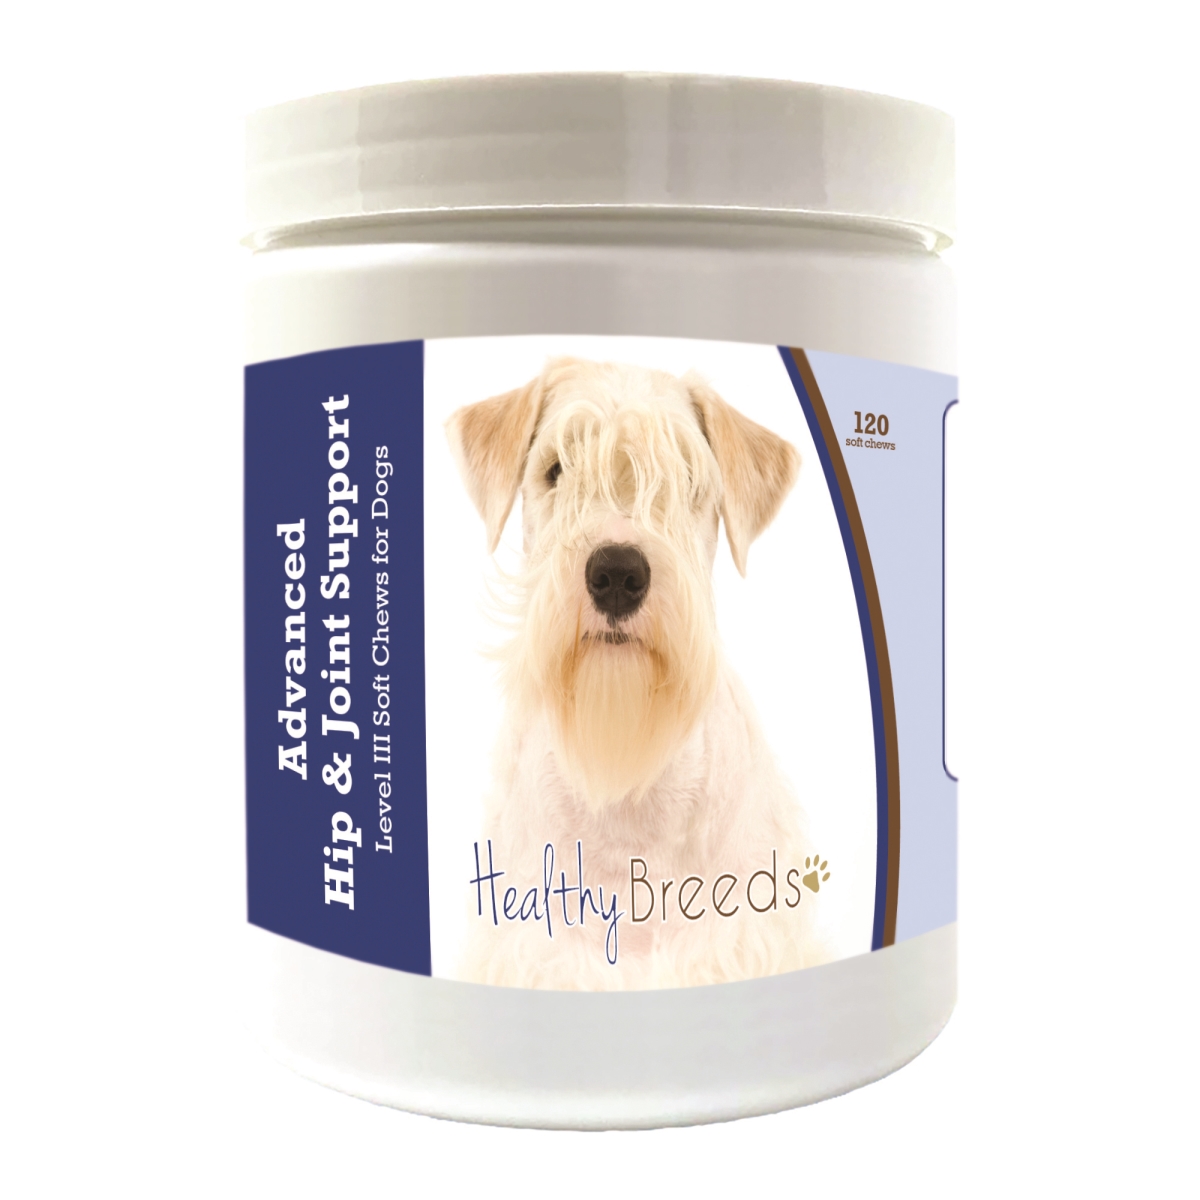 Picture of Healthy Breeds 192959899191 Sealyham Terrier Advanced Hip & Joint Support Level III Soft Chews for Dogs